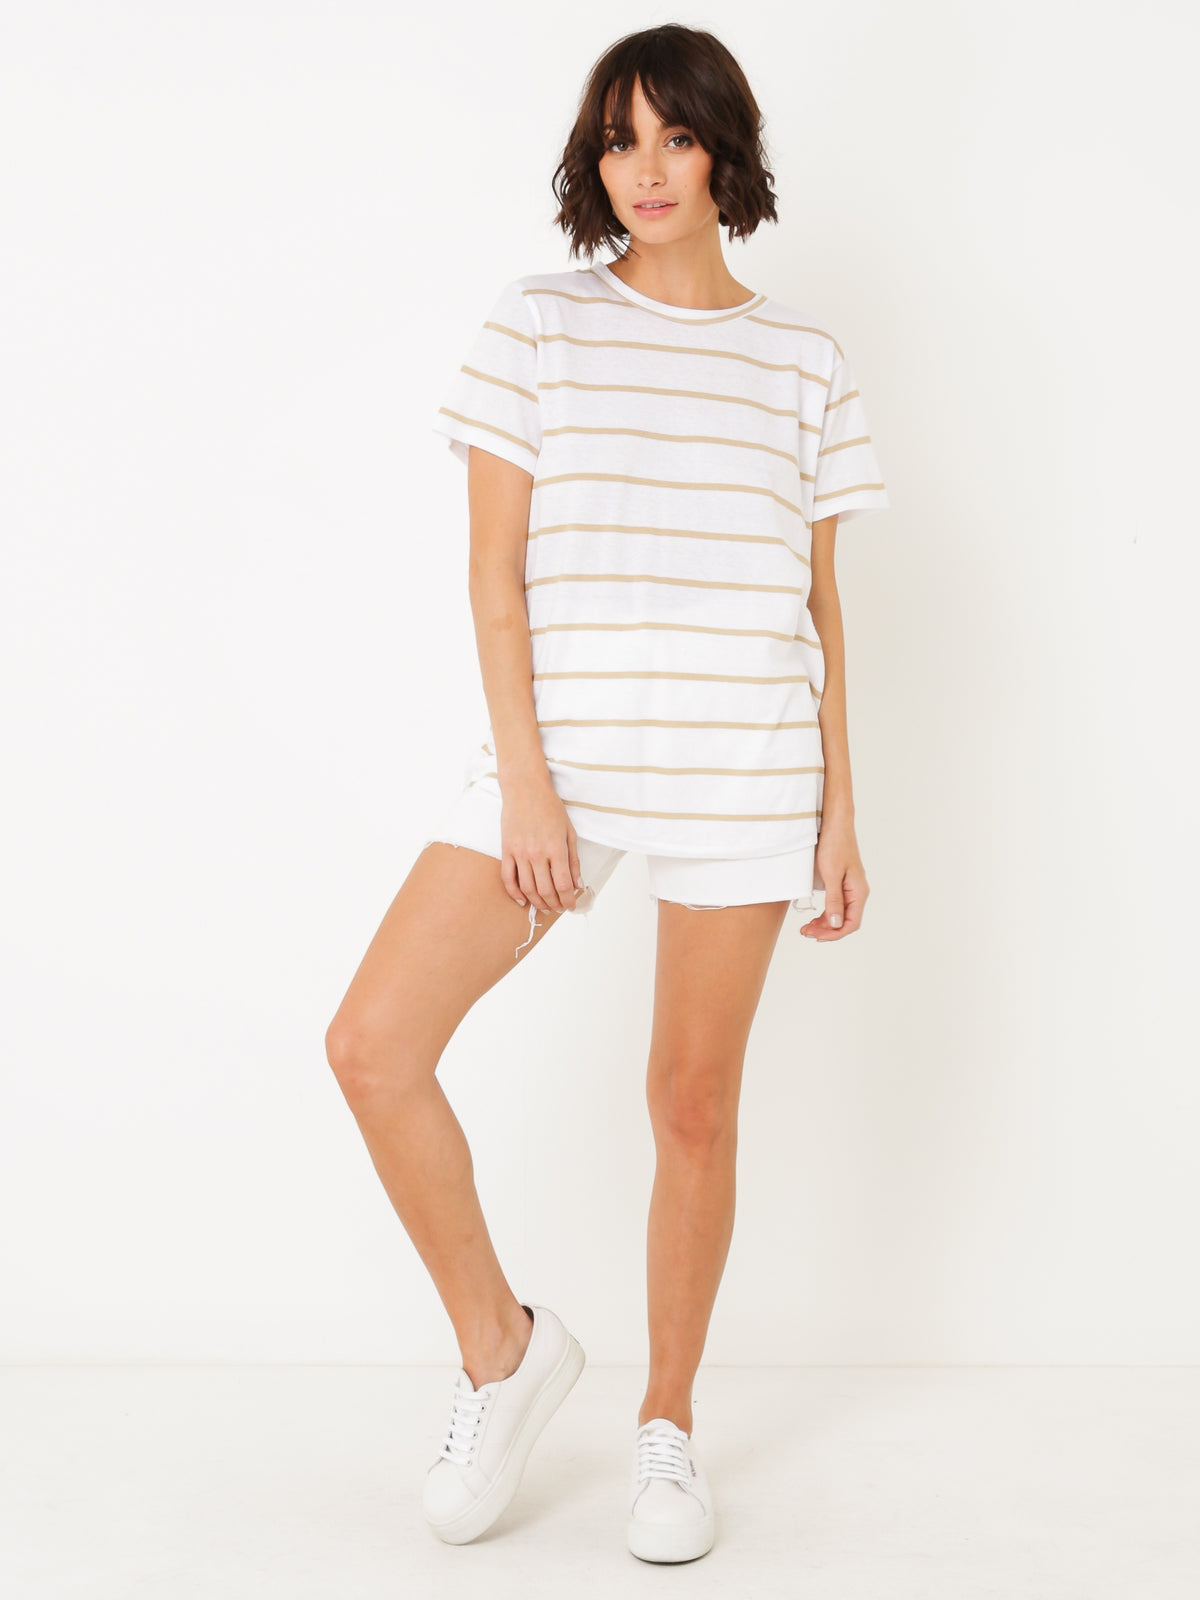 Everyday T-Shirt in Sand Stripe